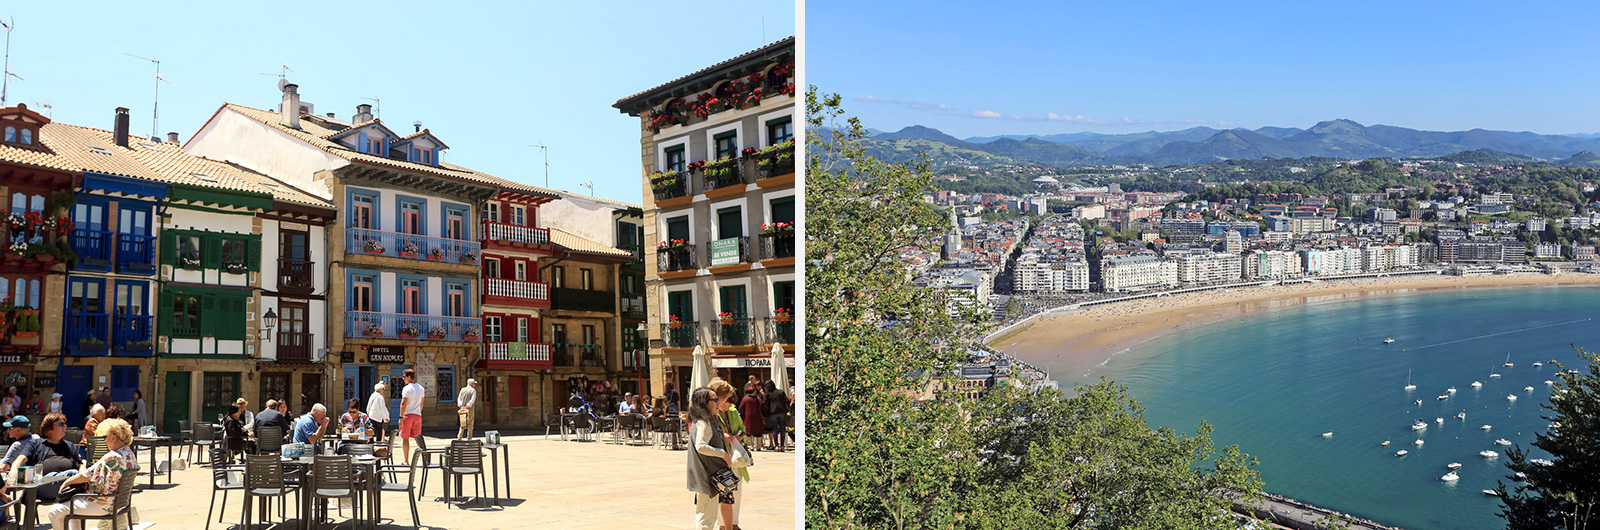 Tourism and Holidays in the Basque Country